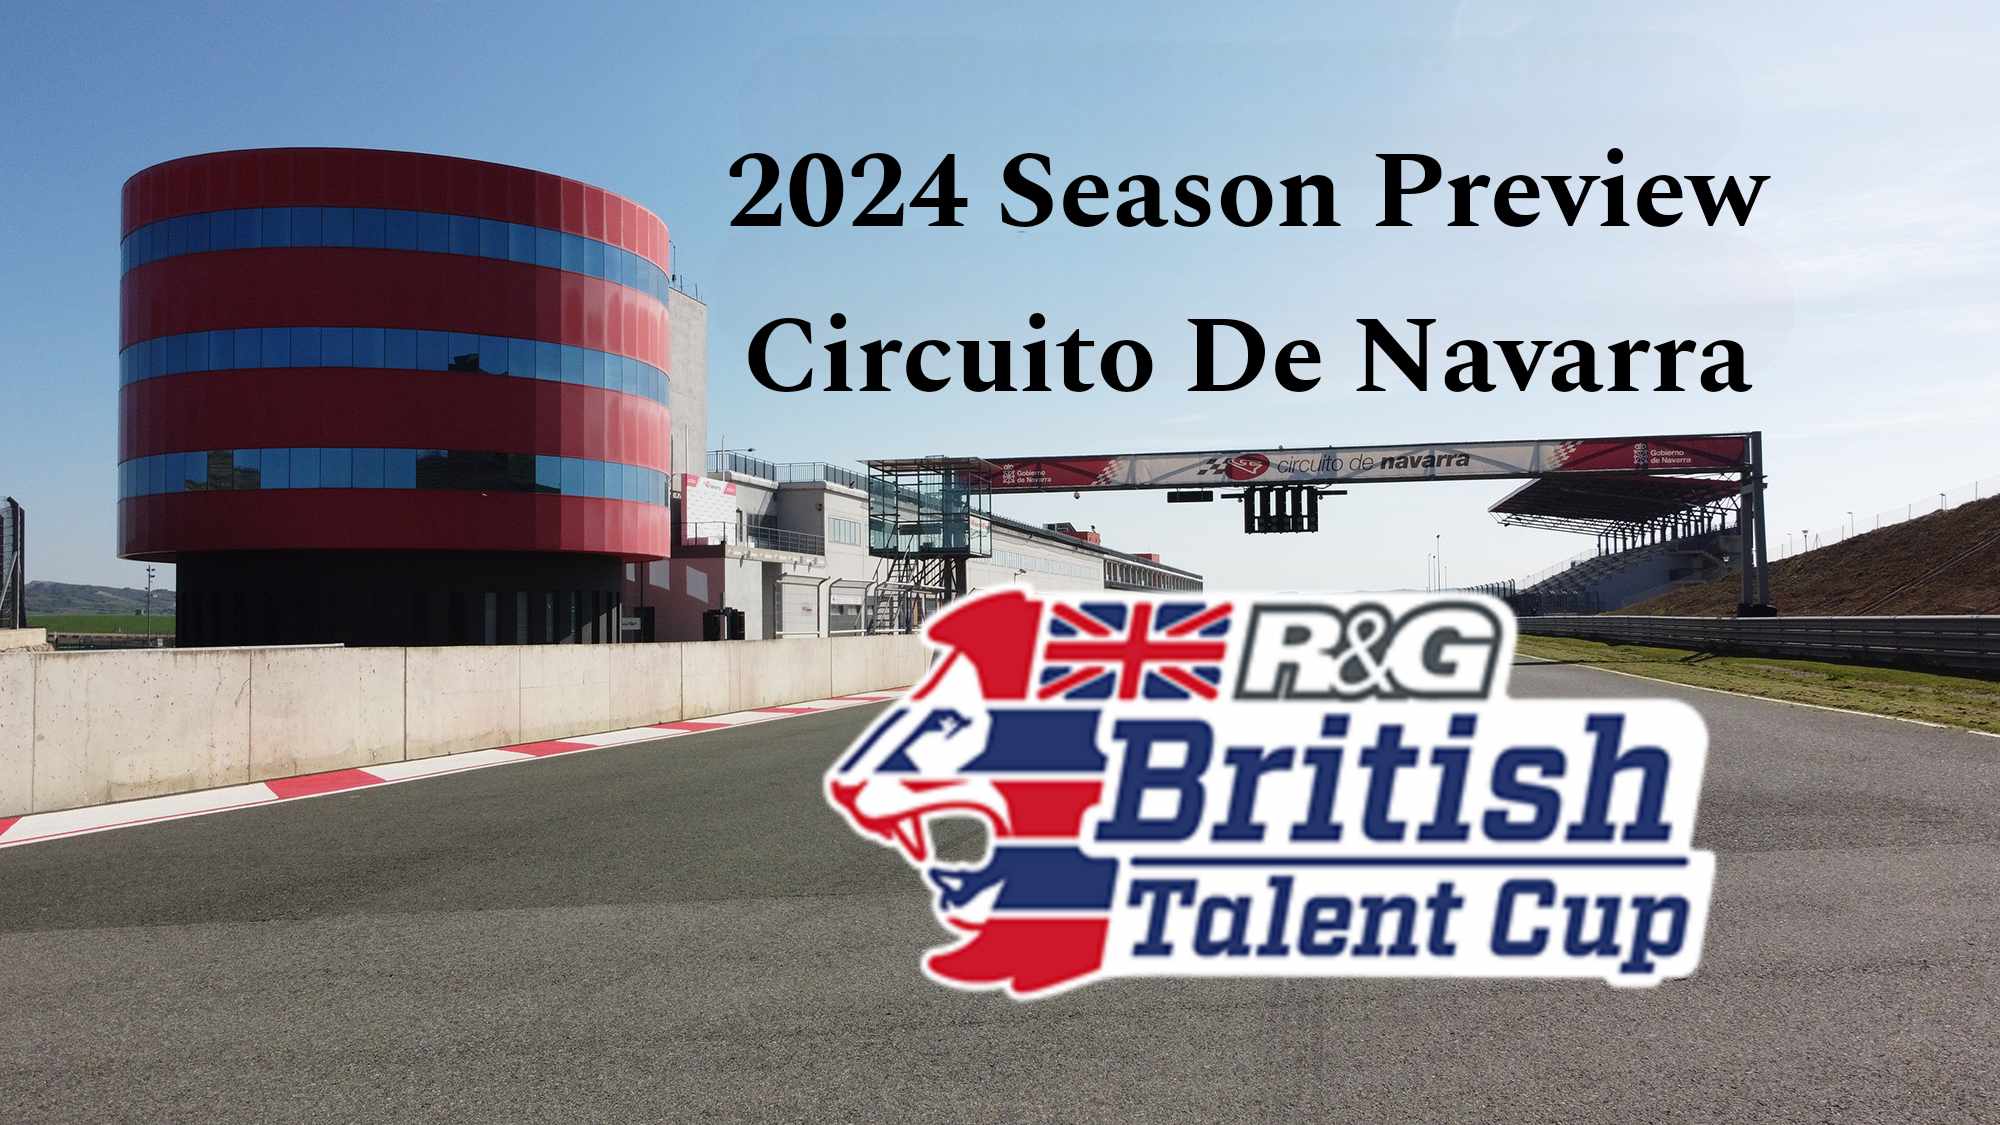 Featured image for “BTC: R&G British Talent Cup 2024 Season Preview.”